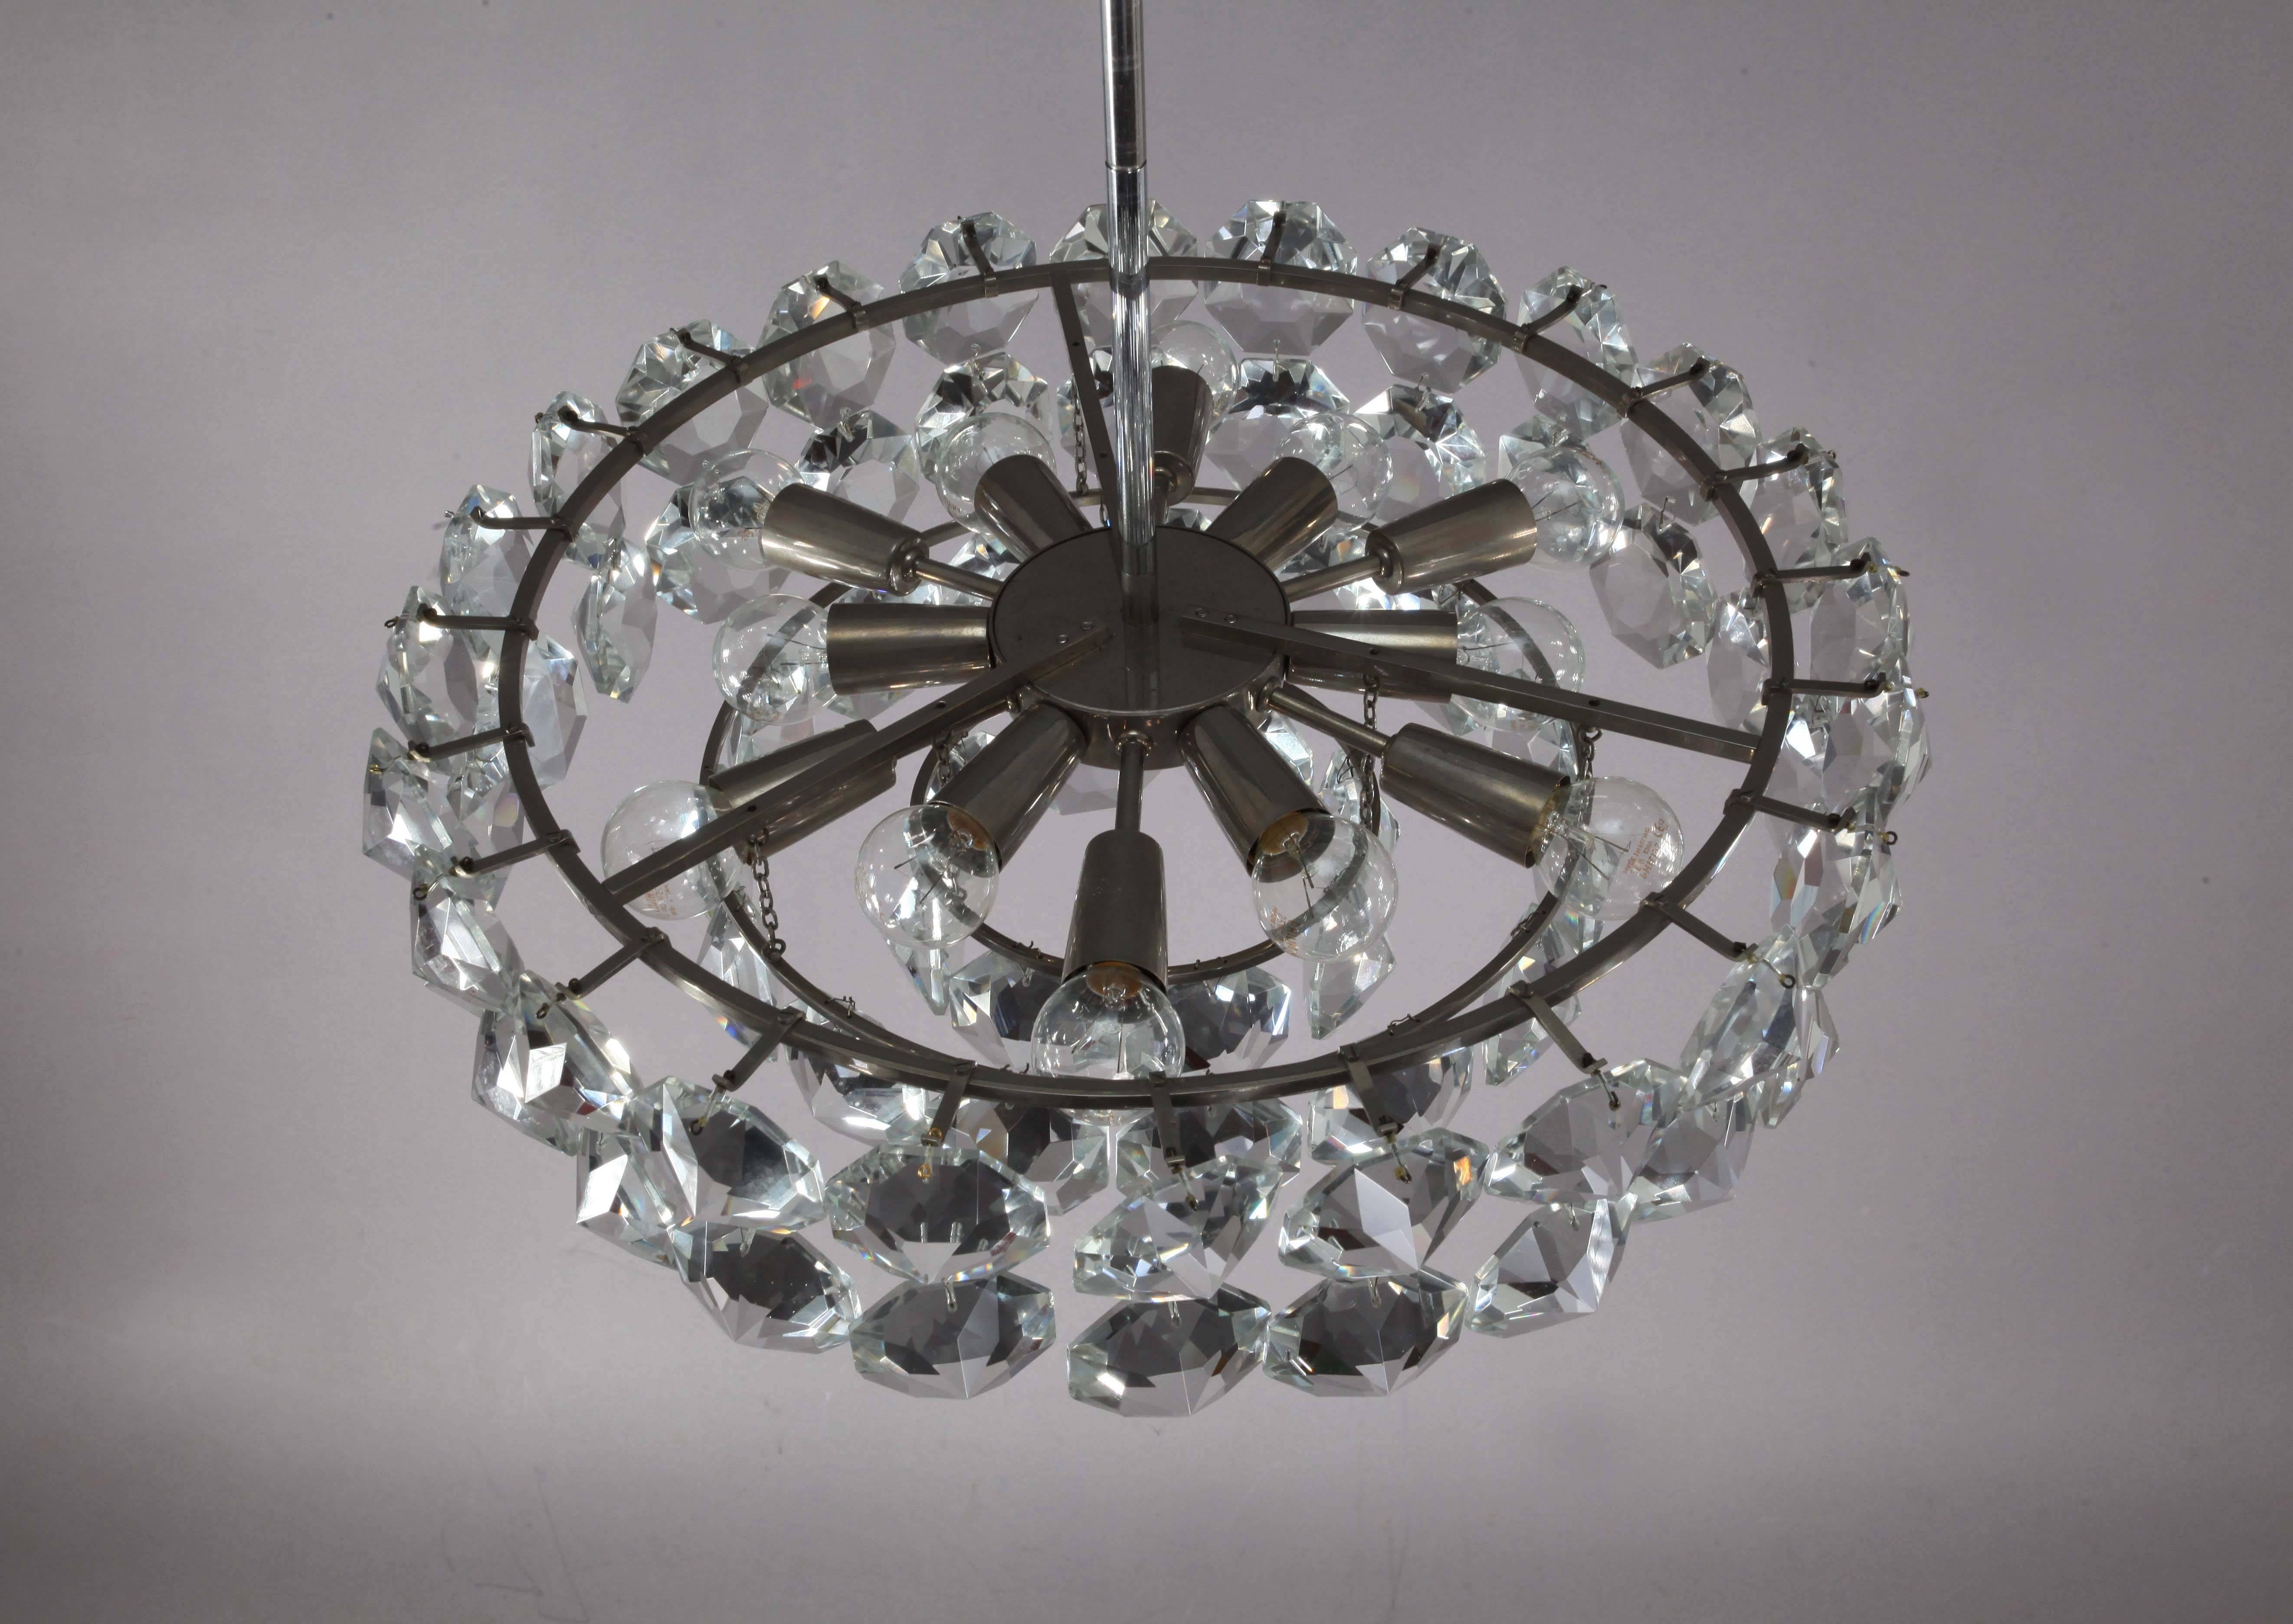 Gorgeous chandelier by Bakalowits & Sohne featuring a multitude of very uniquely sized large (each 6.5 x 6.5 cm) and exquisite with big sparkling octagon gem-like crystals hanging from a nickeled brass frame. 12 bulbs are illuminating this